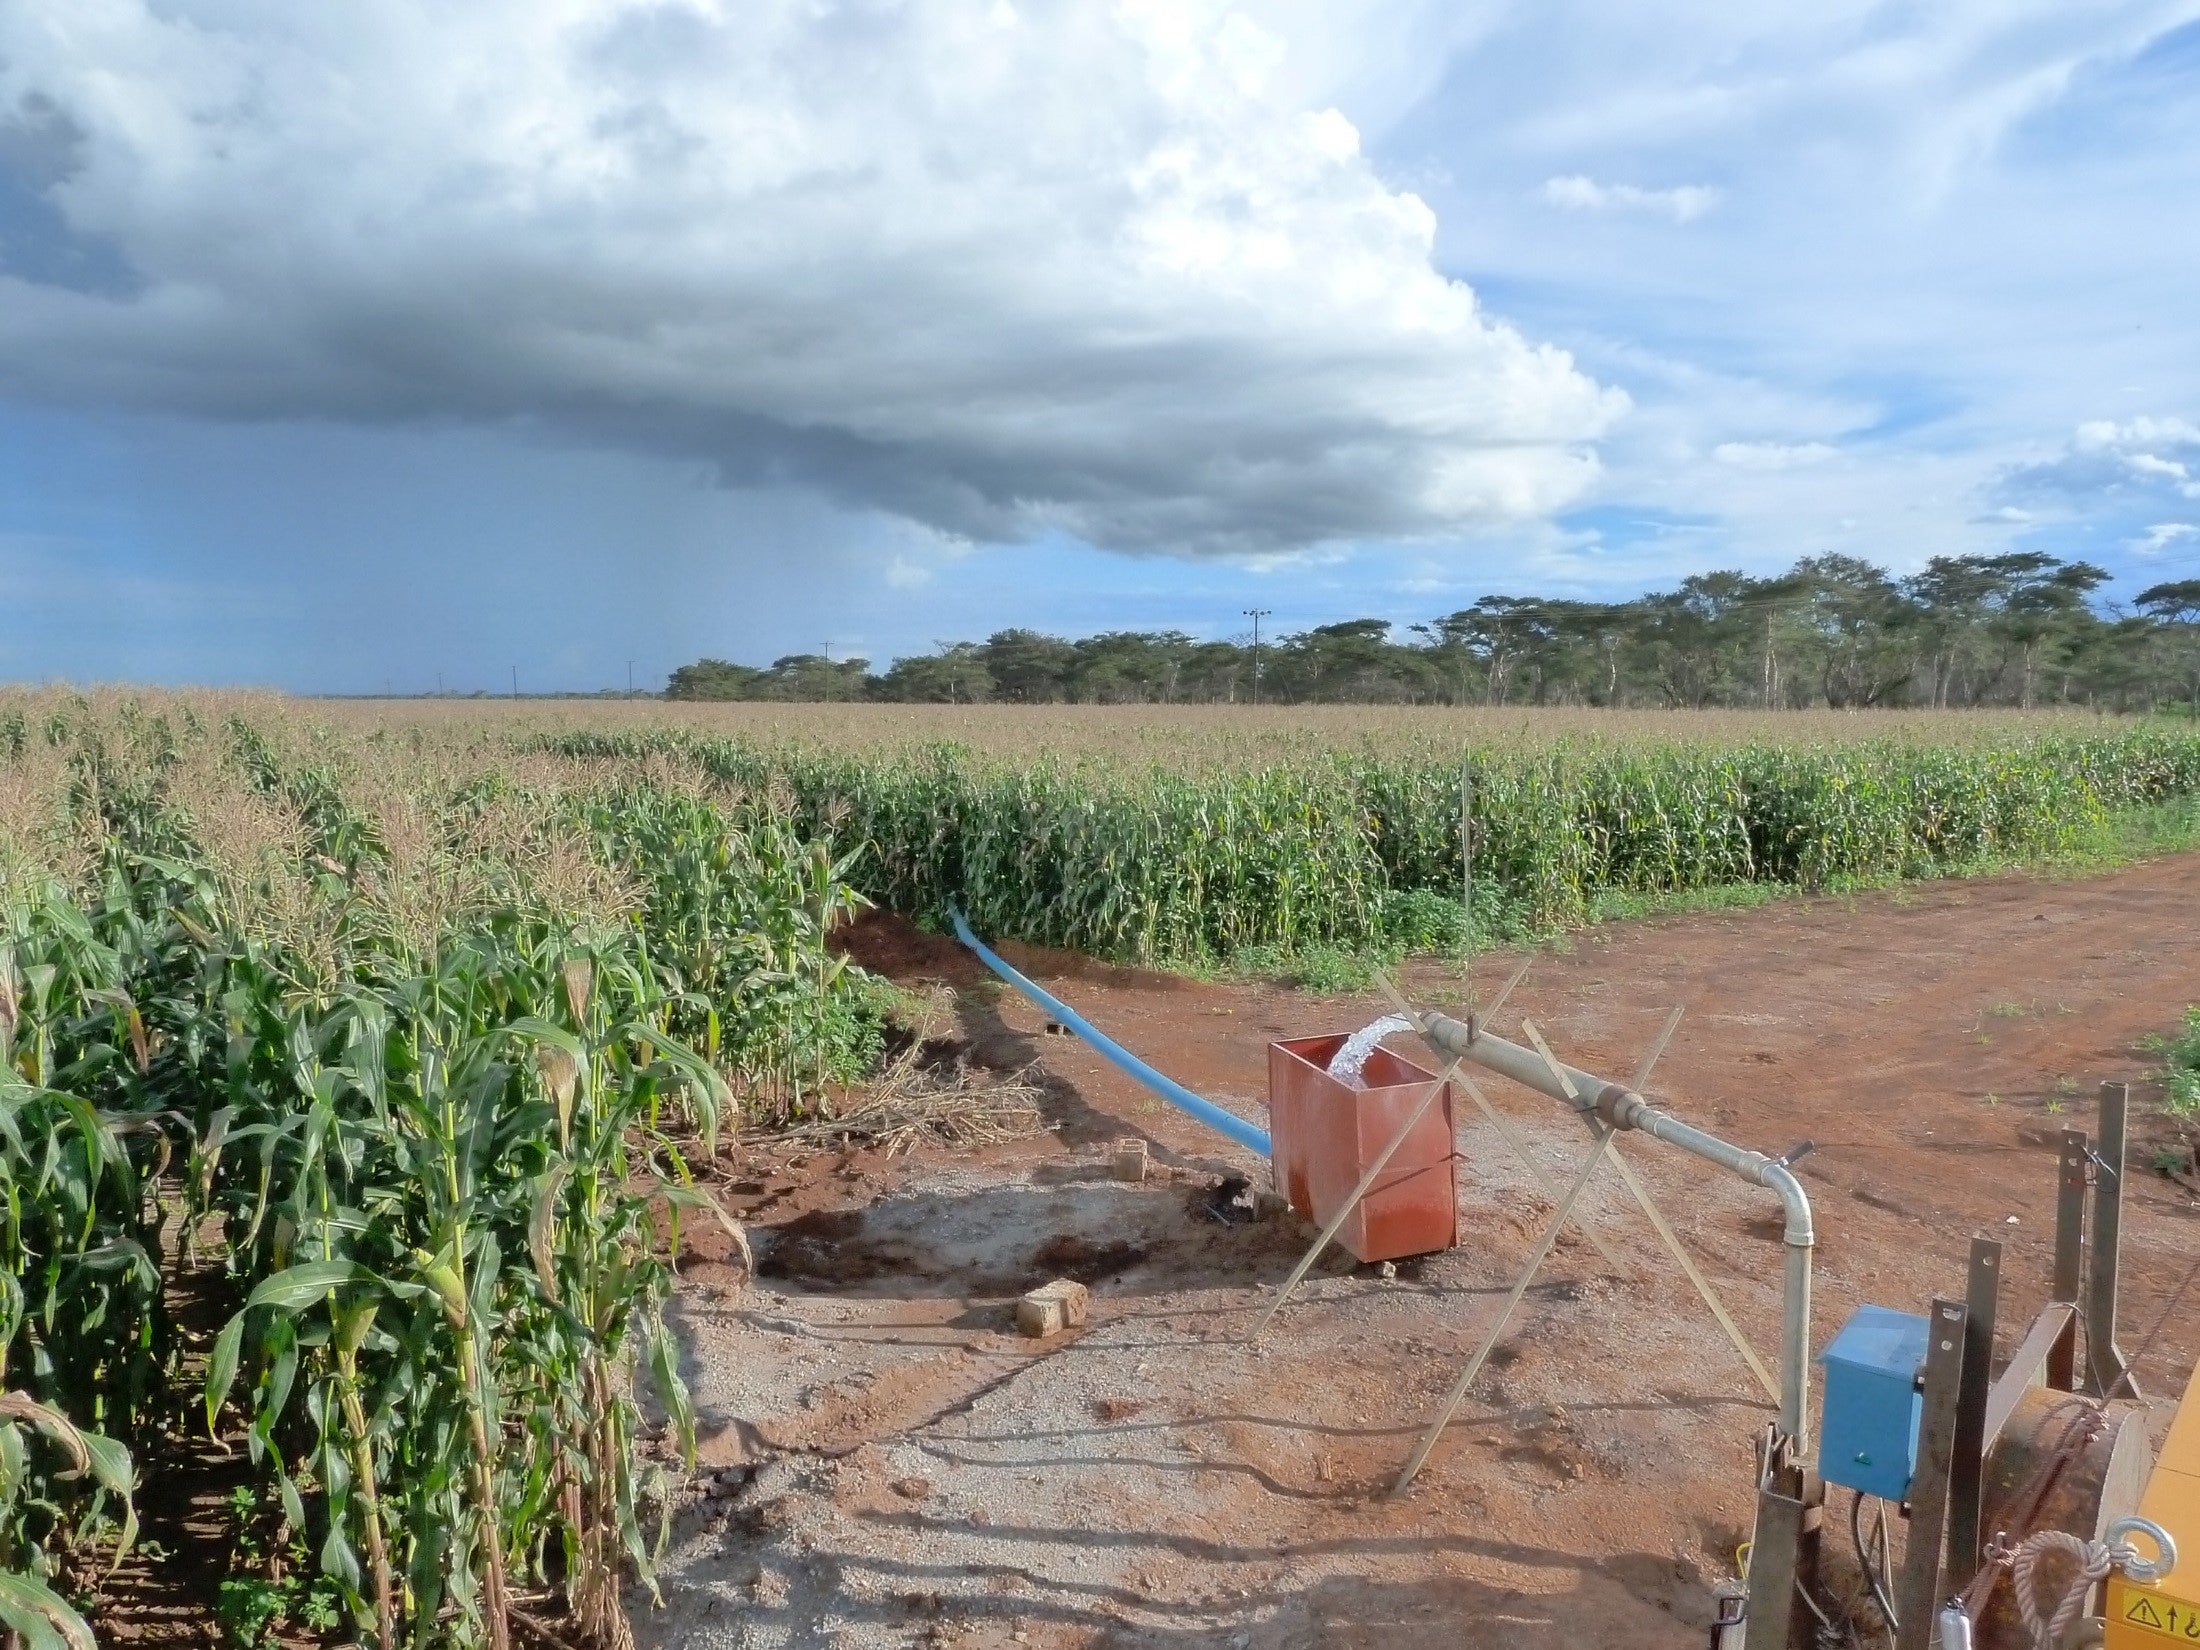 Groundwater Is Declining Globally, but There Are Hopeful Exceptions